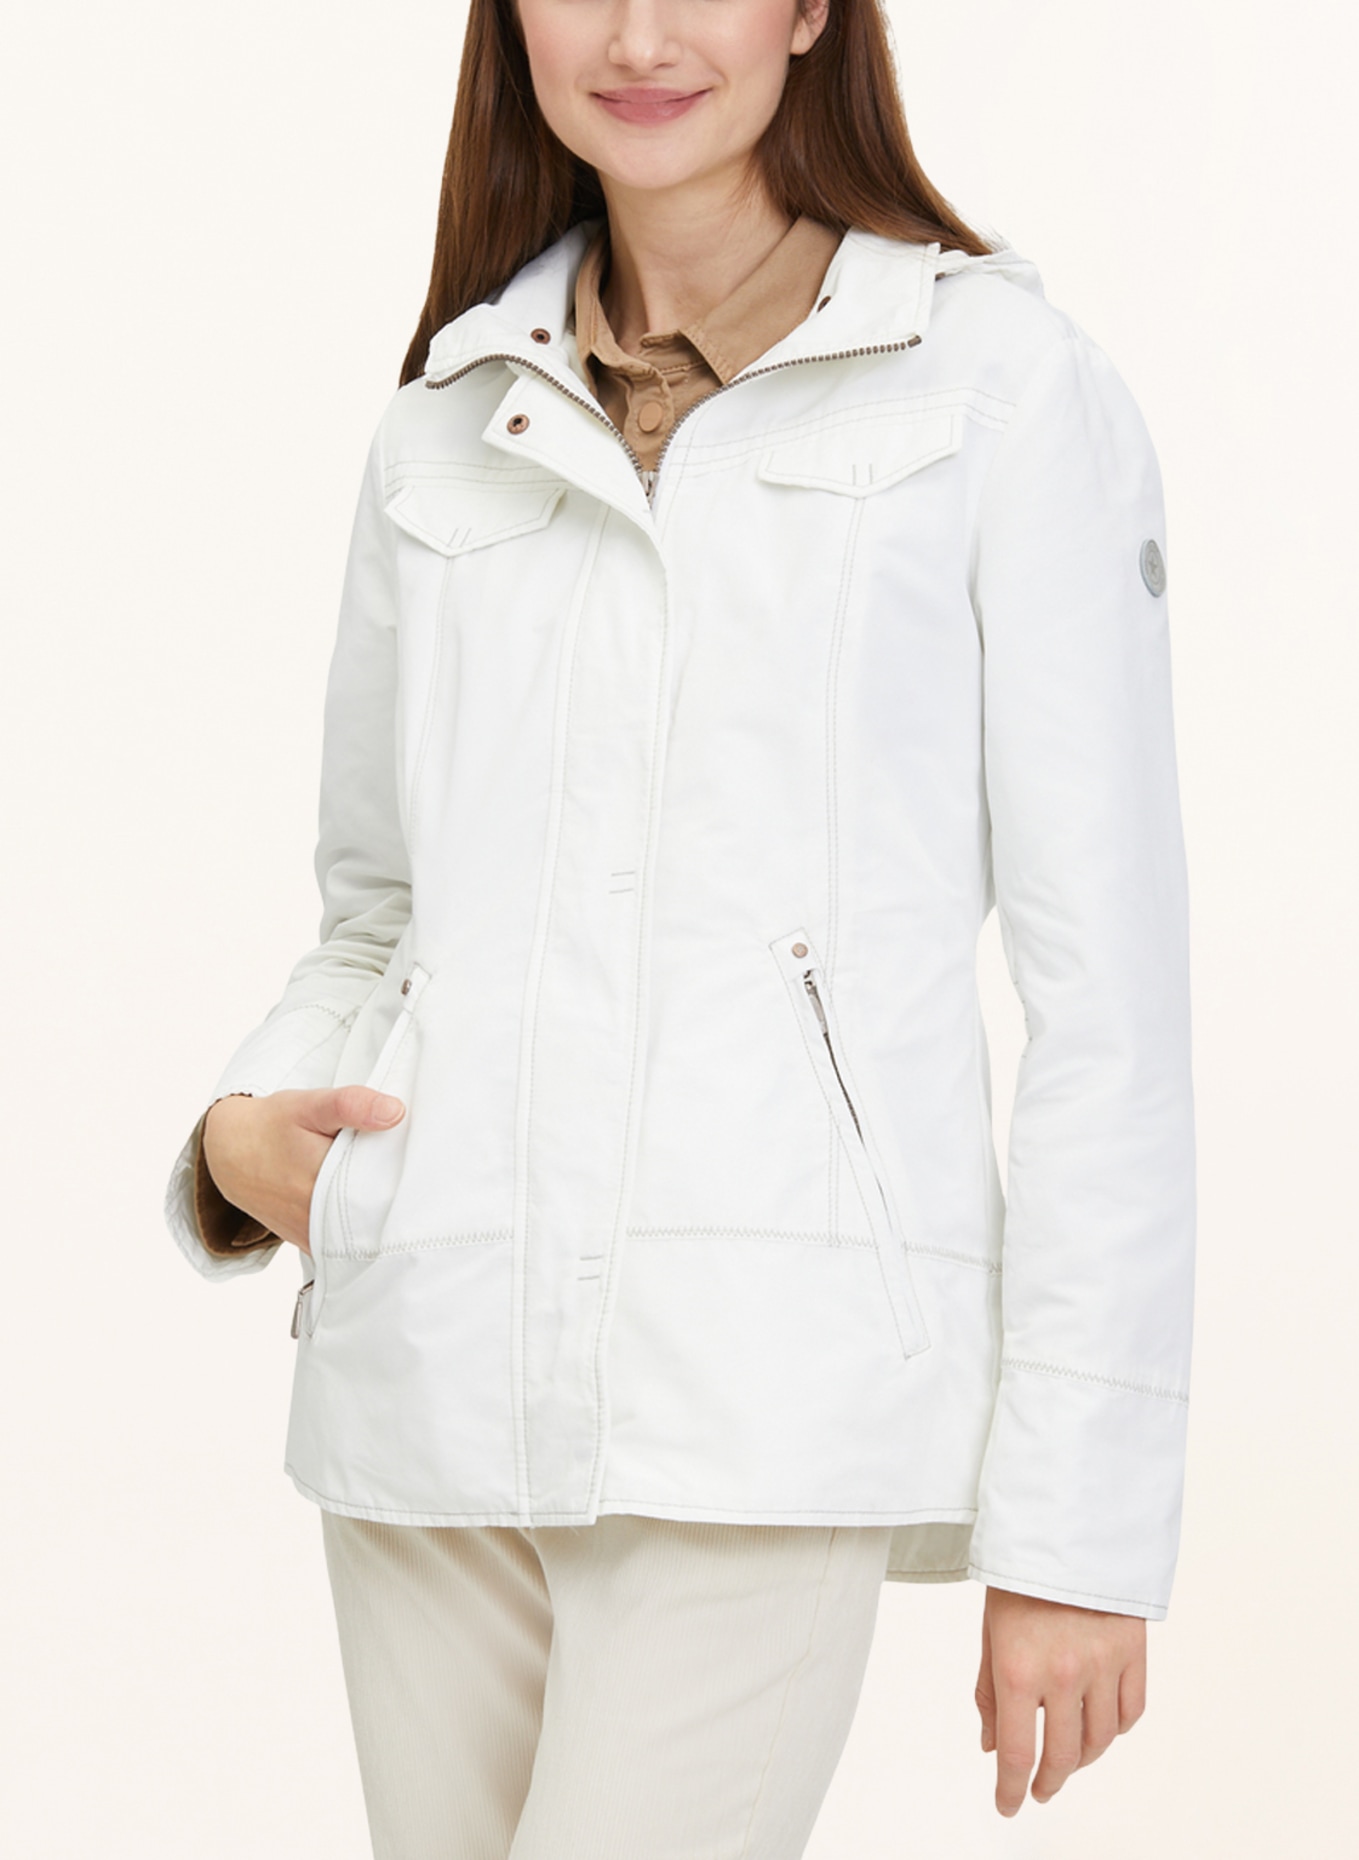 detachable Jacket BRET in white with GIL hood